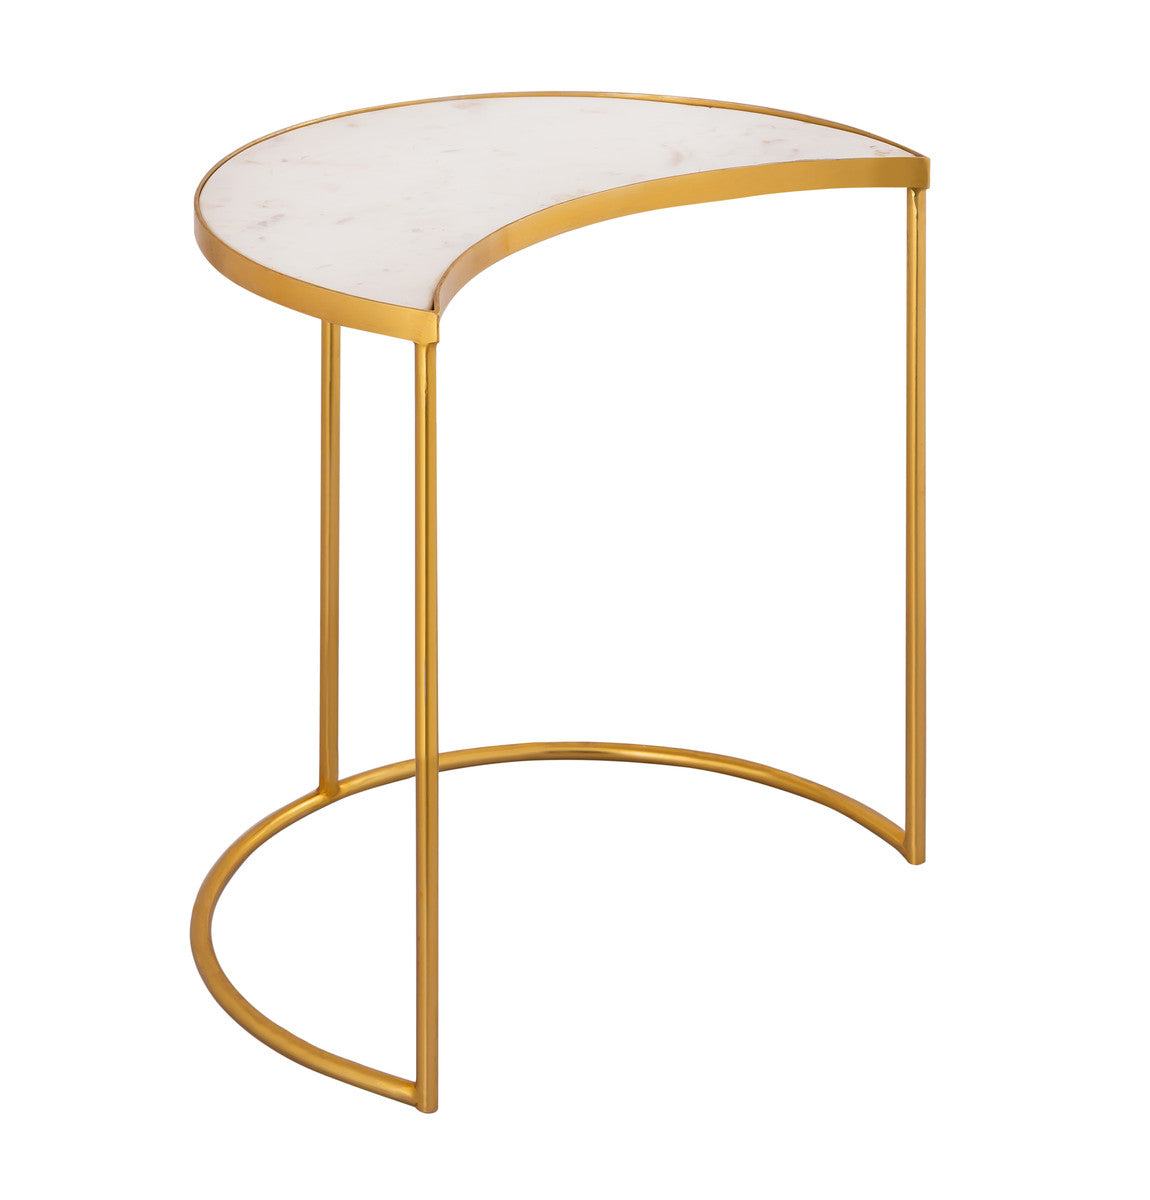 Crescent Nesting Tables By Inspire Me! Home Decor